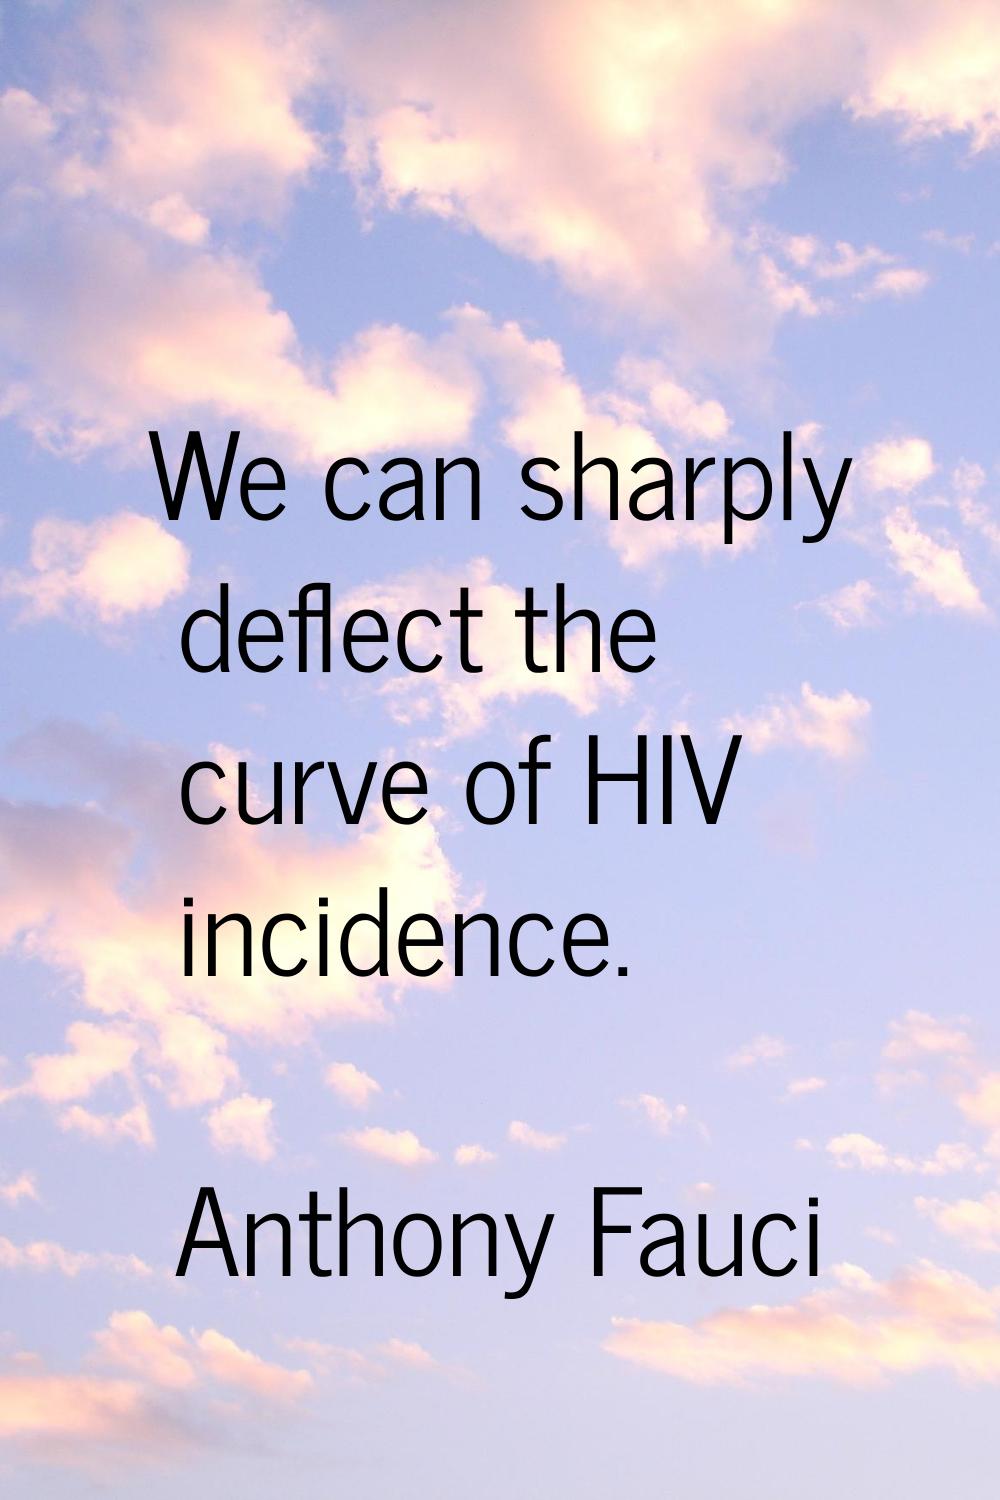 We can sharply deflect the curve of HIV incidence.